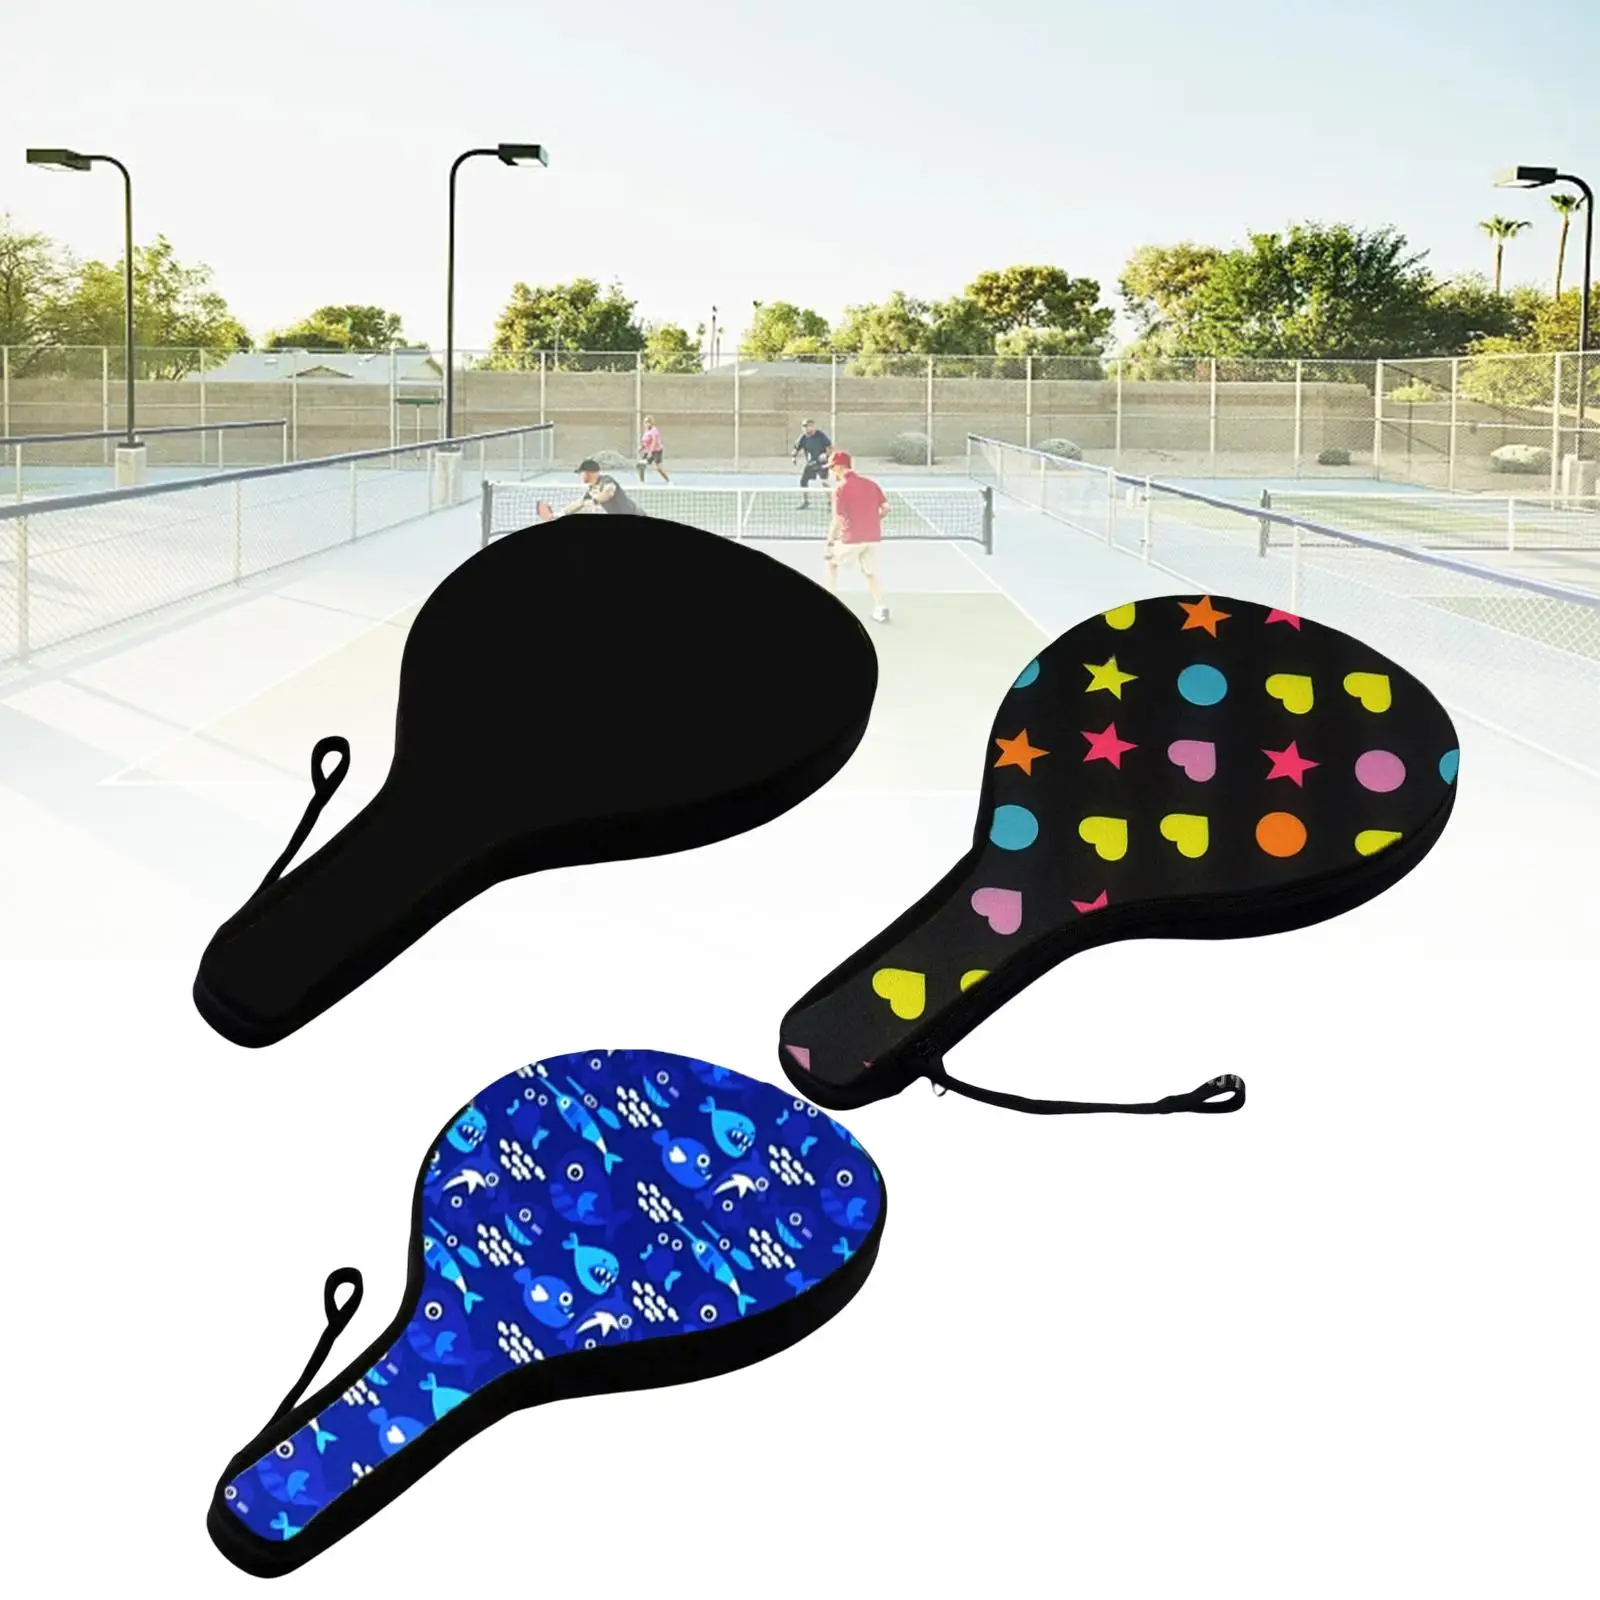 Neoprene Pickleball Paddle Bag Racket Case Cover Zipper Pouch Holder Protective Paddle Sleeve Durable Waterproof Accessories